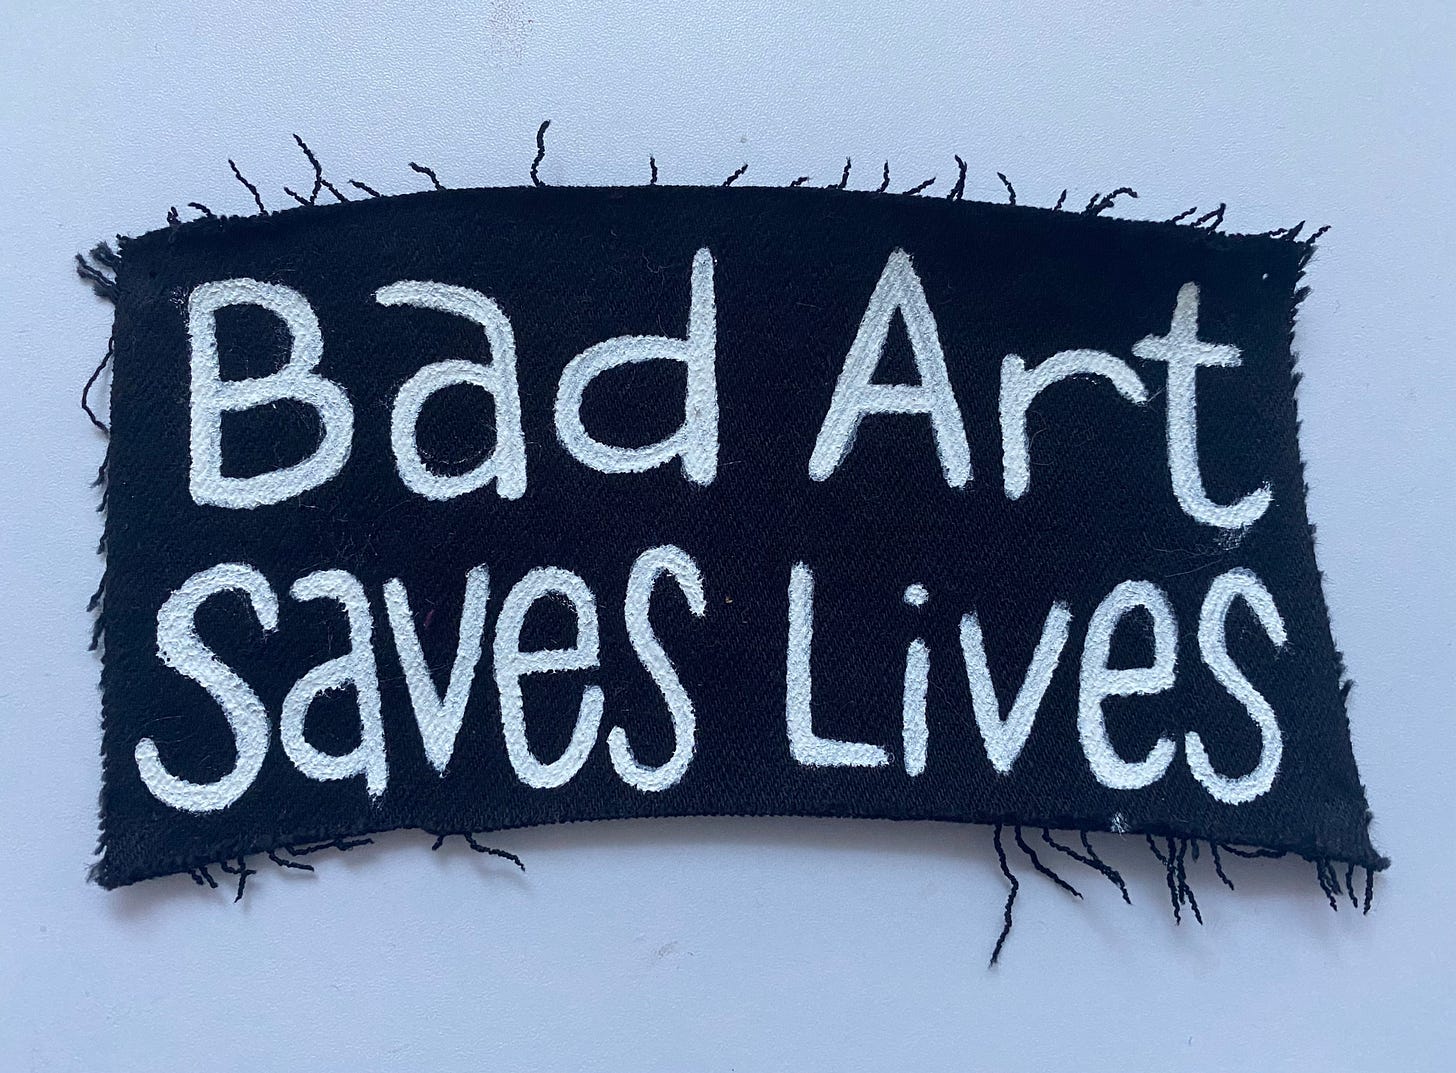 A black patch with "Bad Art Saves Lives" painted on it in white.